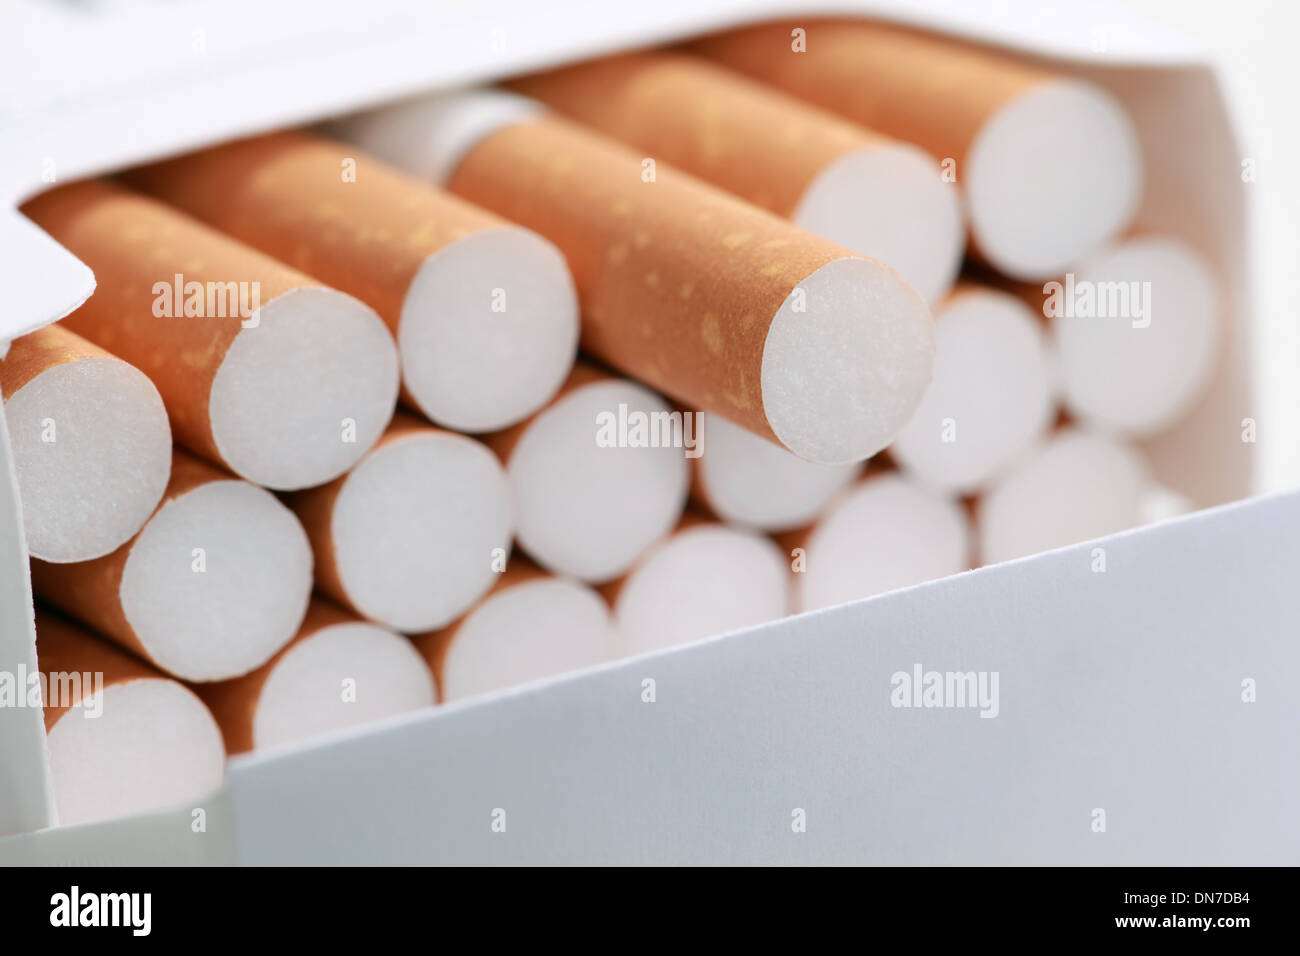 Closeup of cigarettes in a pack, shallow depth of field Stock Photo